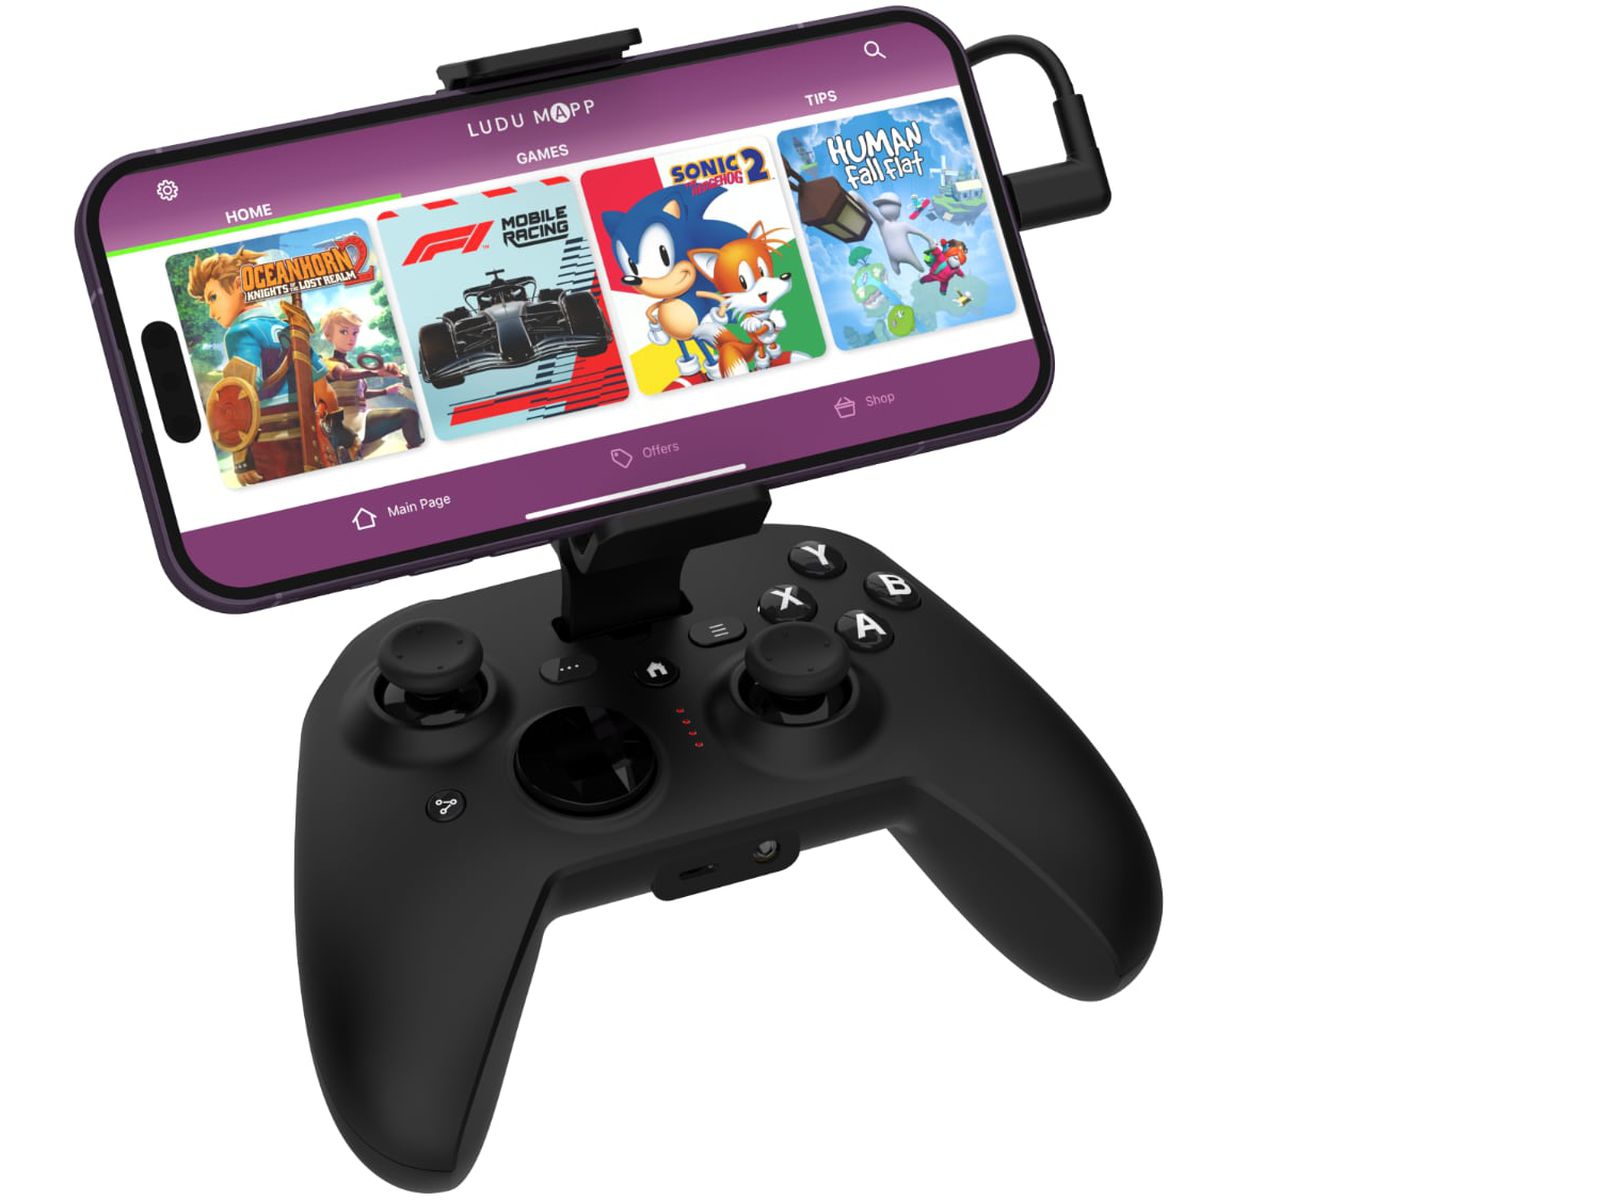 RiotPWR Launches New Dual Lightning and USB-C Gaming Controller - MacRumors